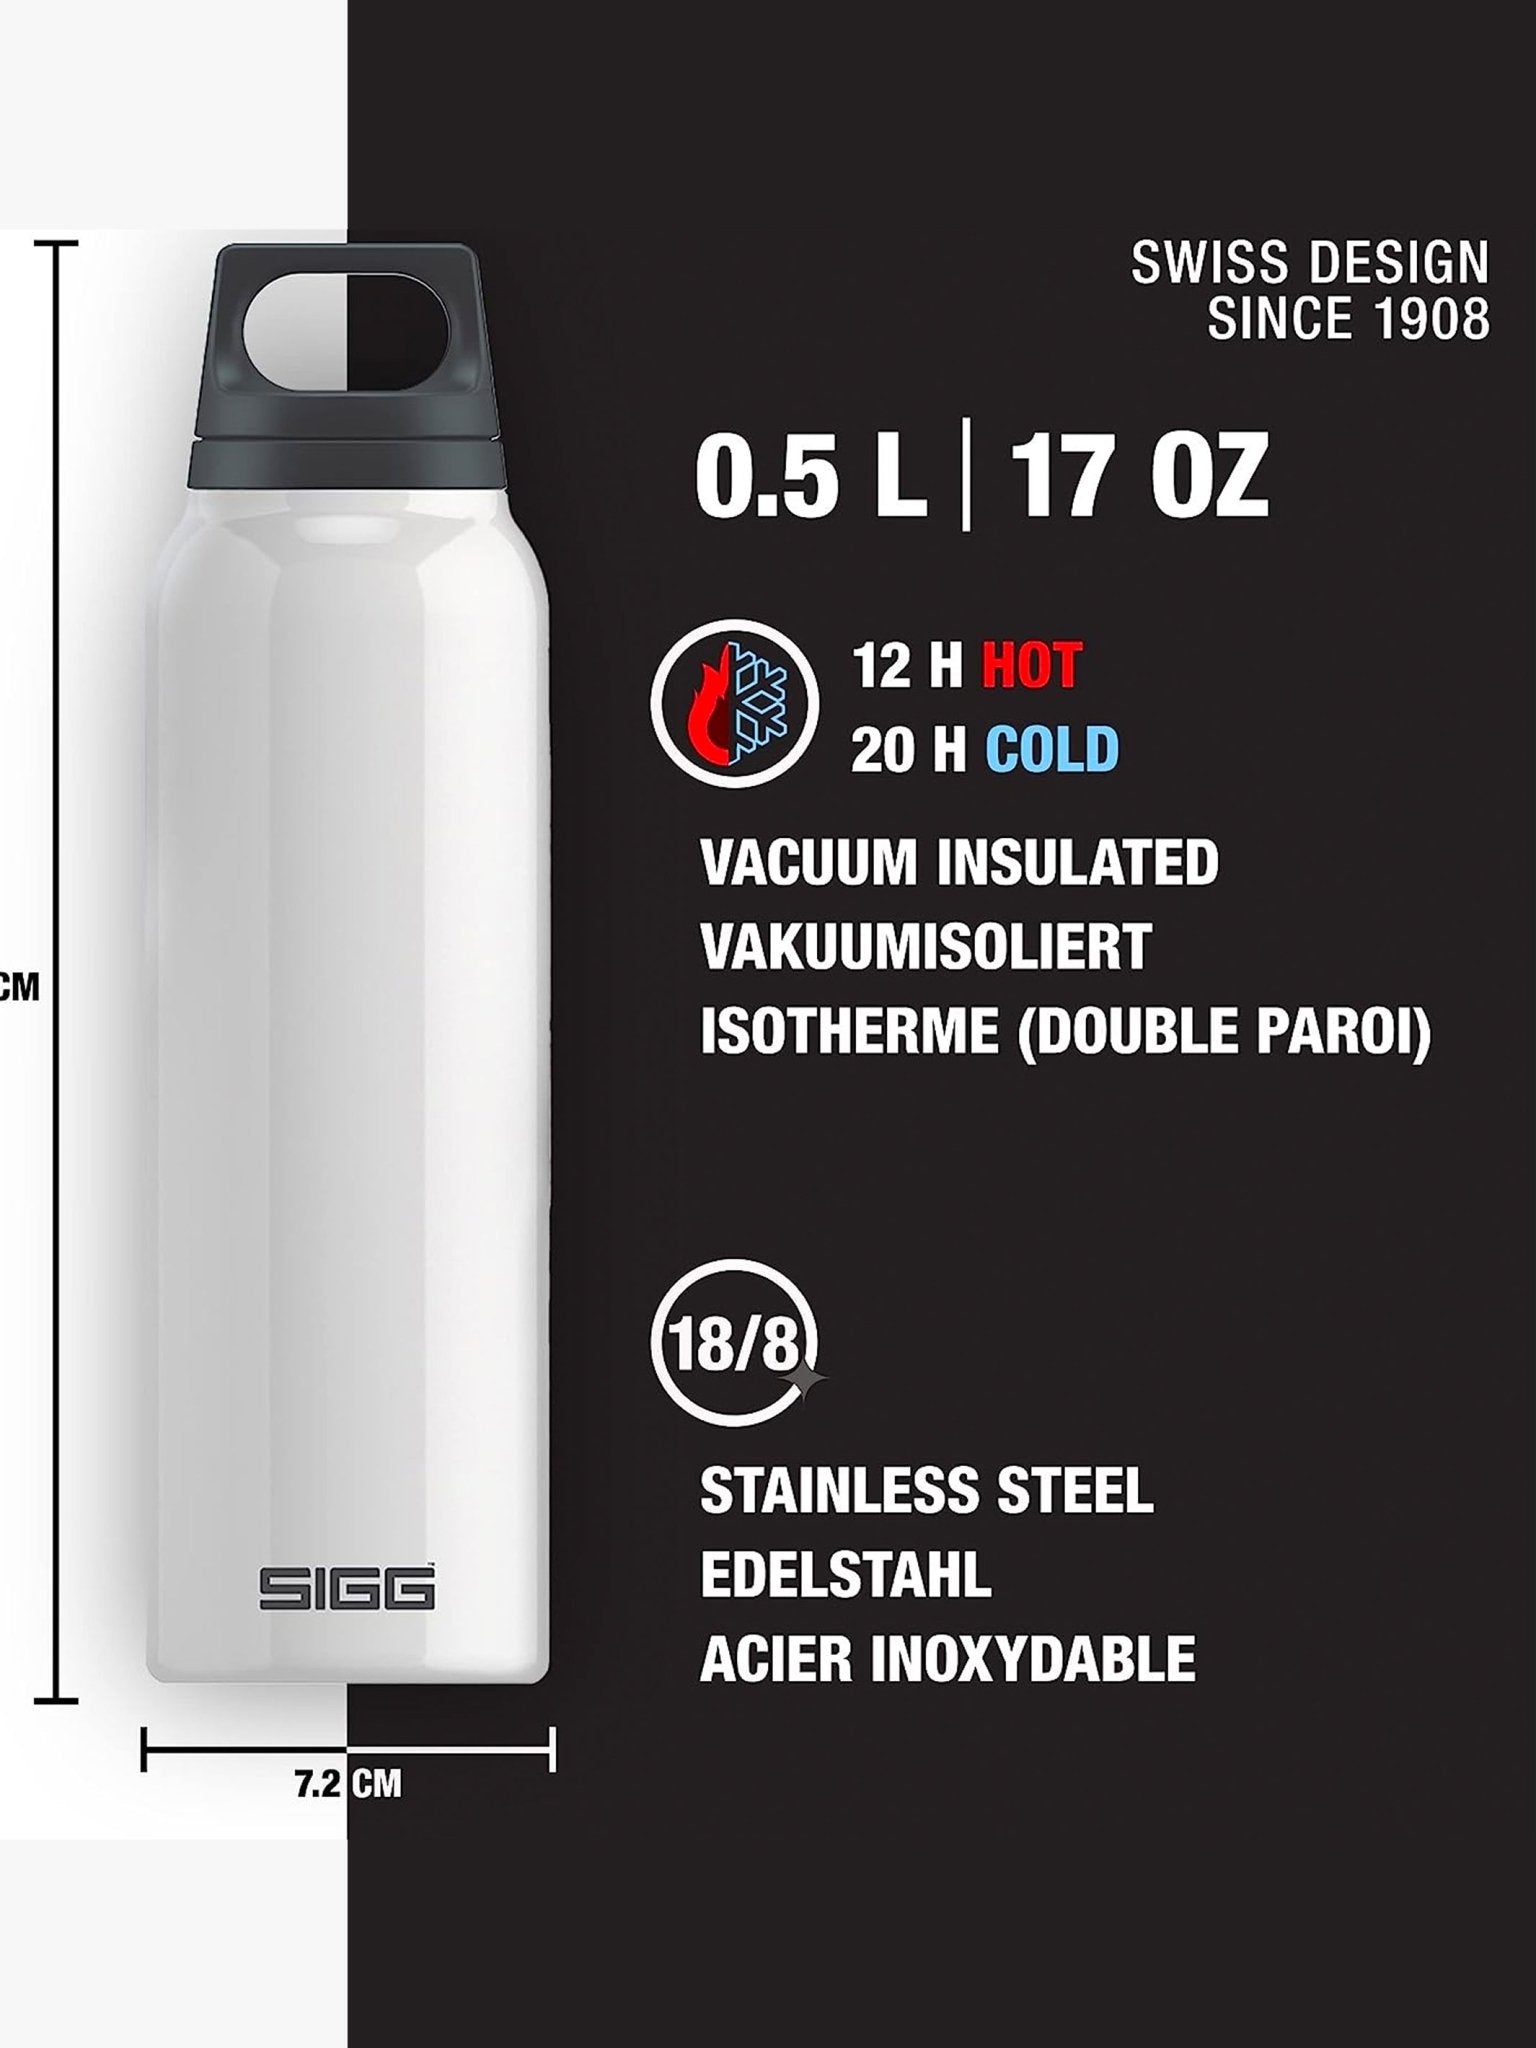 4elementsclothingSiggSIGG - Thermo Flask Hot & Cold Brushed 0.5l Vacuum Insulated - Sigg water bottleWater Bottles8448.10